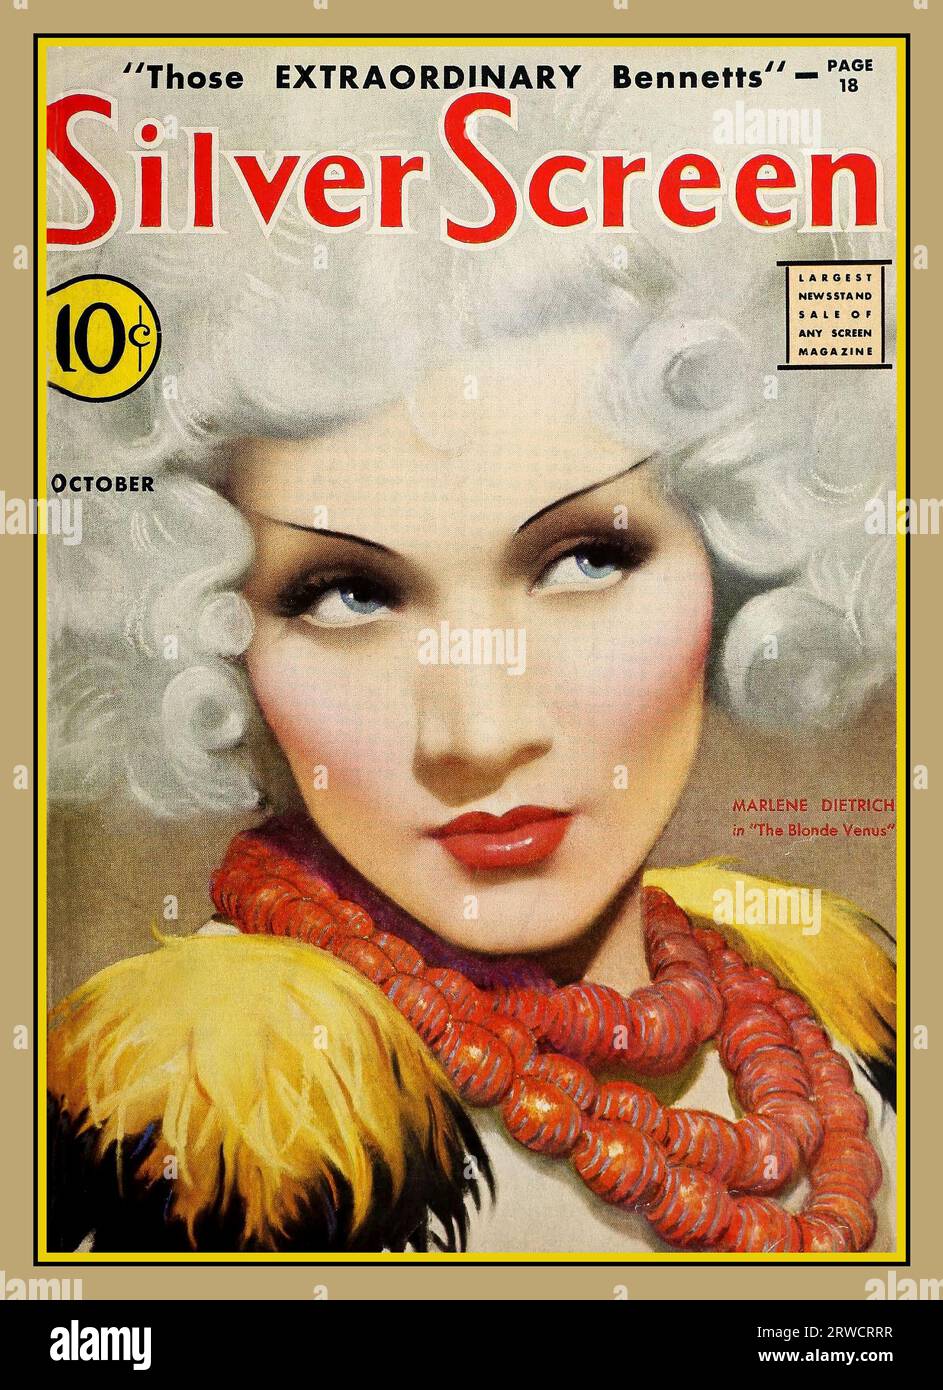 Marlene Dietrich 1930s colour Hollywood Magazine SILVER SCREEN with Marlene Dietrich on the front cover in the movie film 'The Blonde Venus' Hollywood USA Blonde Venus is a 1932 American pre-Code drama film starring Marlene Dietrich, Herbert Marshall and Cary Grant. It was produced, edited and directed by Josef von Sternberg from a screenplay by Jules Furthman and S. K. Lauren, adapted from a story by Furthman and von Sternberg. The original story 'Mother Love' was written by Dietrich herself. The musical score was by W. Franke Harling, John Leipold, Paul Marquardt and Oscar Potoker Stock Photo